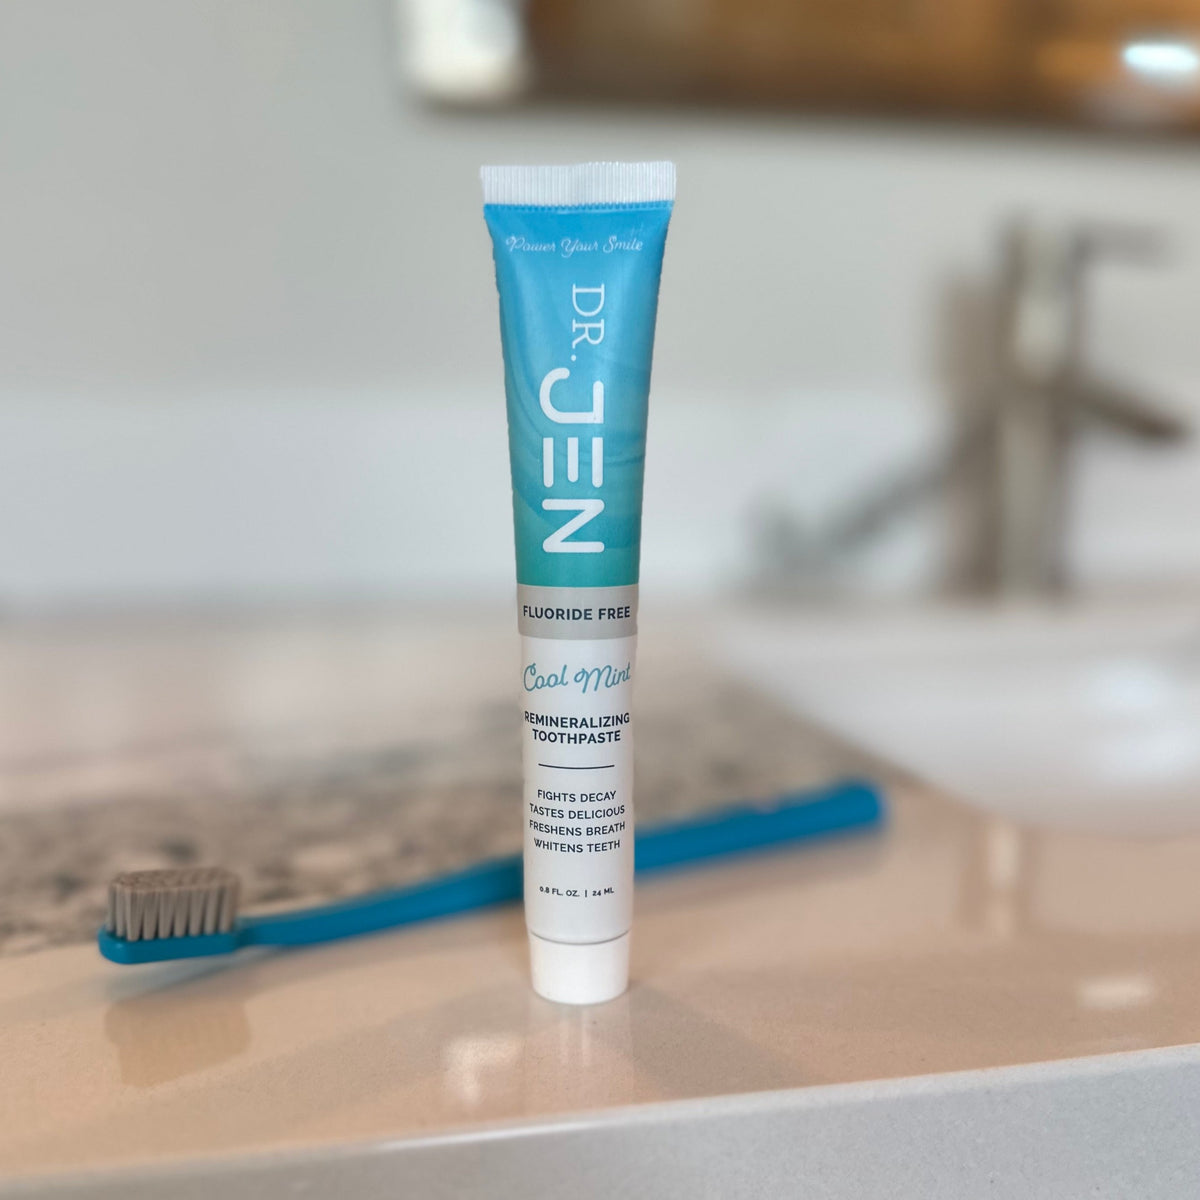 100 count - Dental Office Sample Tubes (.80 oz) Cool Mint Fluoride Free with 10% nHAp Toothpaste